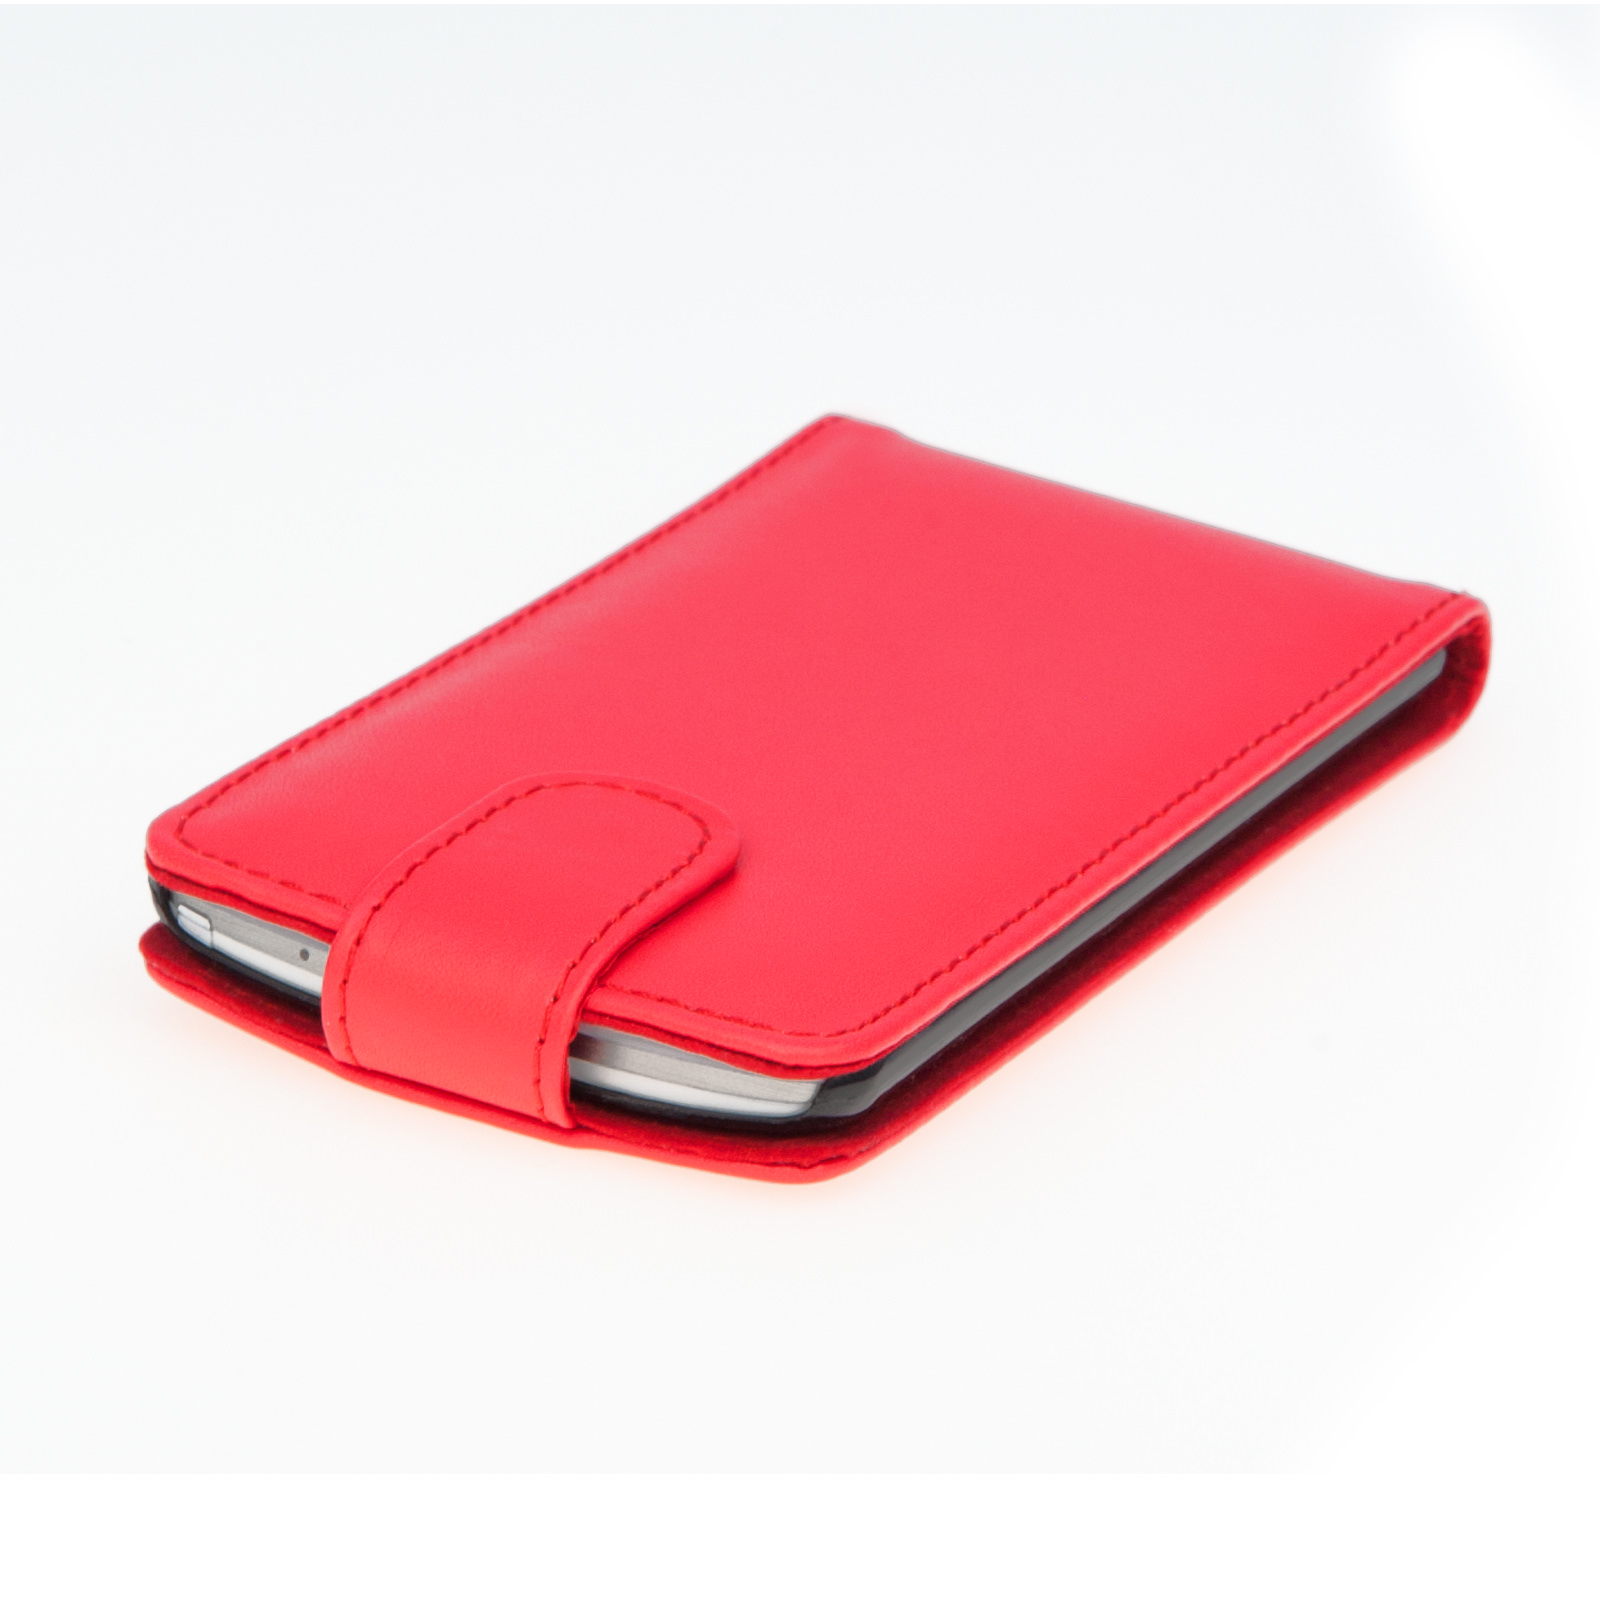 YouSave Accessories LG G3 Leather-Effect Flip Case - Red